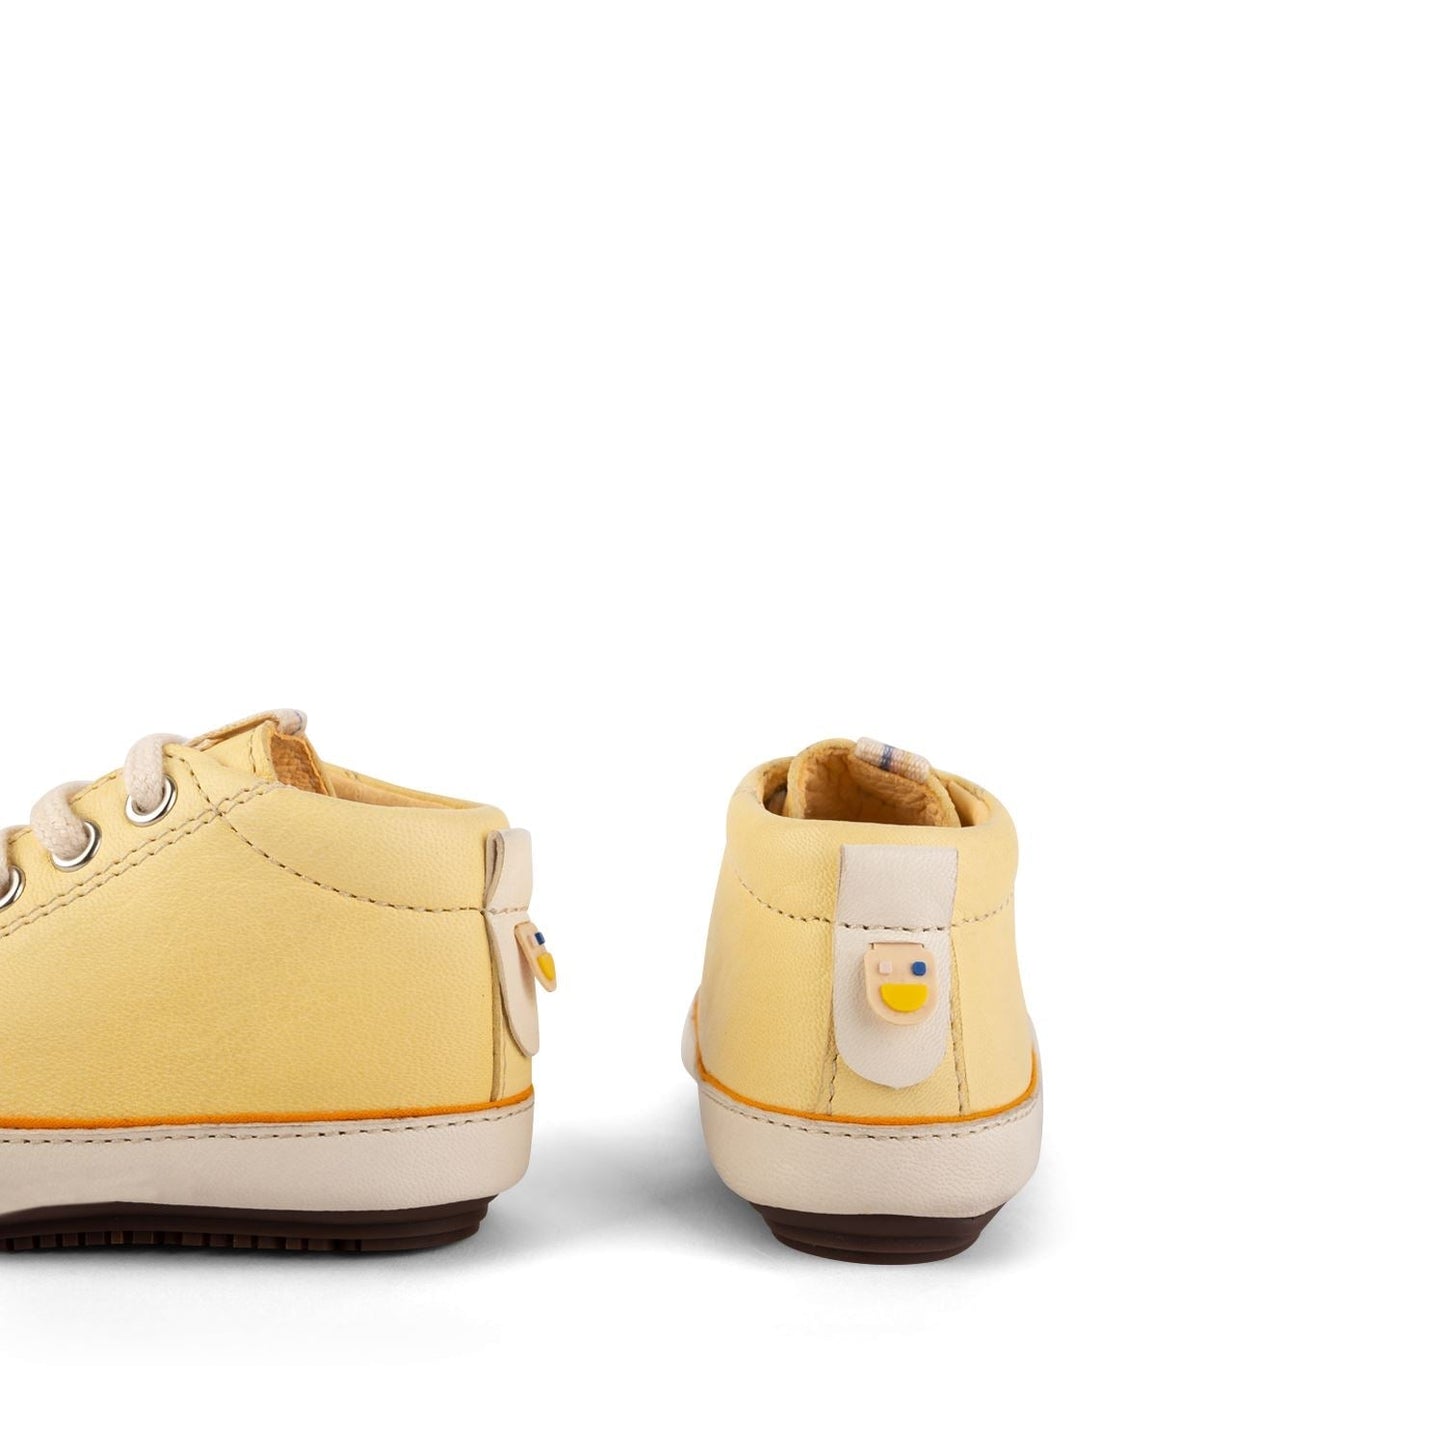 Butter Sneaker Booties Shoes & Booties Dulis Shoes 